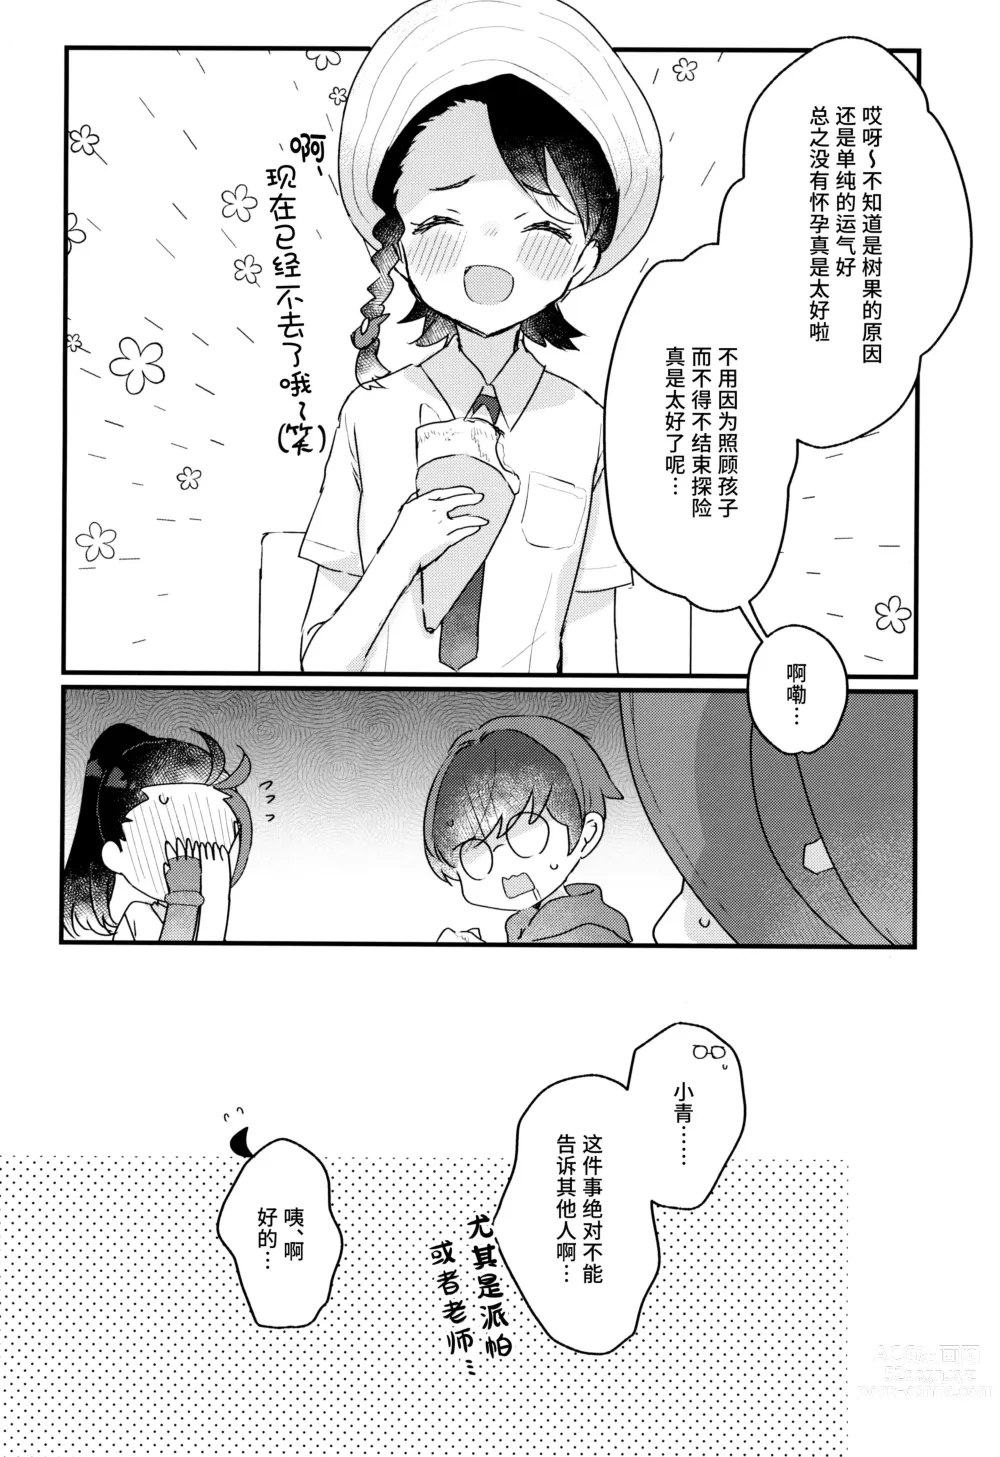 Page 12 of doujinshi 因为零花钱，完全不够用嘛